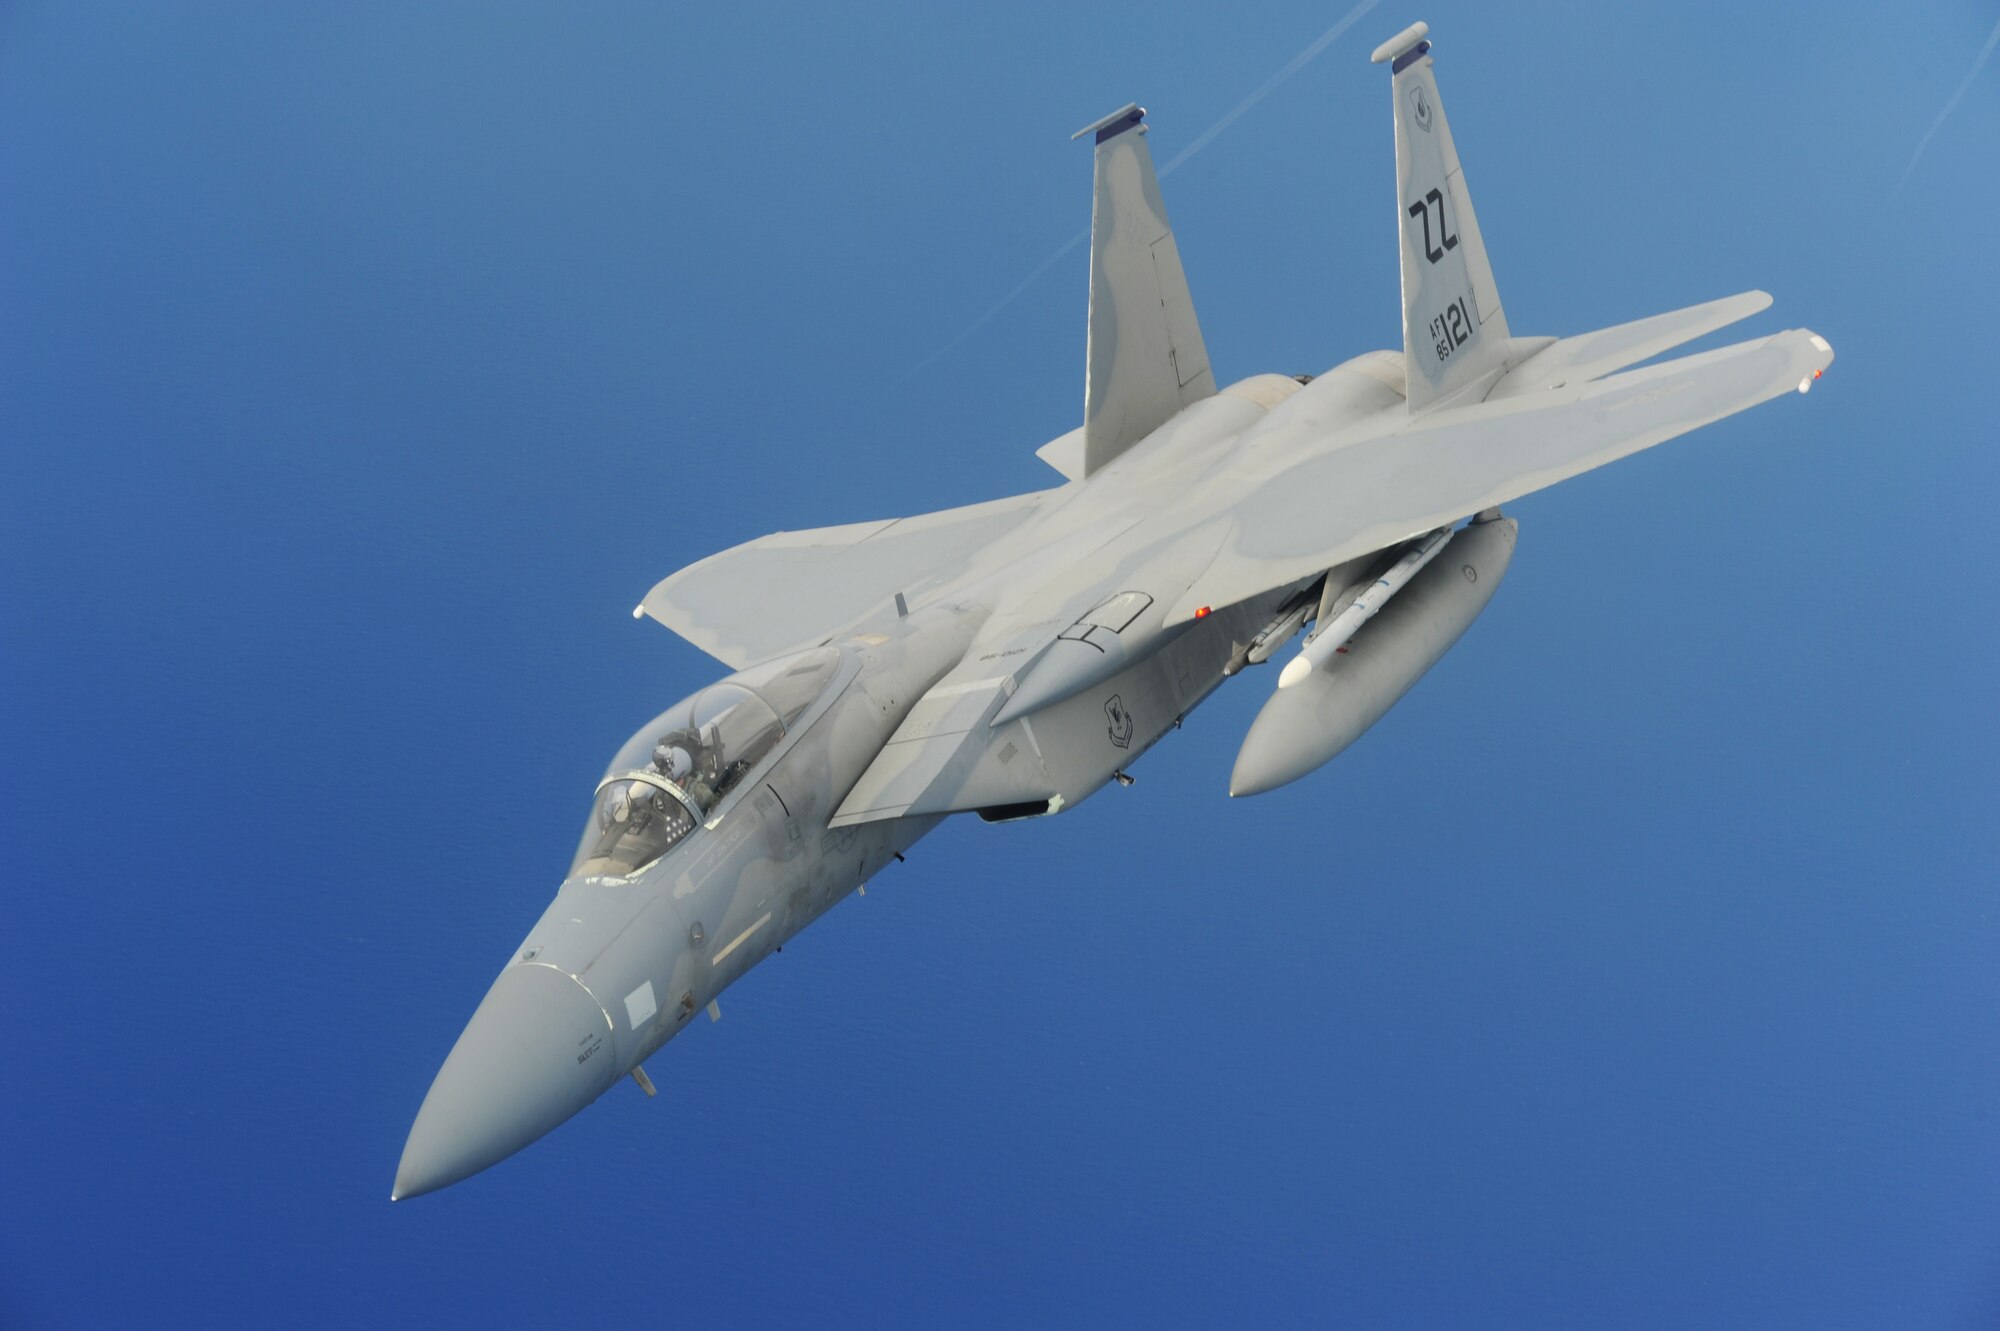 An F-15 aircraft, assigned to the U.S. Air Force's 18th Wing, flies over Guam in support of Exercise Valiant Shield. Valiant Shield is a training exercise with a focus on integration and proficiency of the U.S. Army, Navy, Air Force and Marine Corps through engaging units at sea, in the air, on land, and in cyberspace in response to the mission. (U.S. Navy photo by Mass Communication Specialist 2nd Class Chelsy Alamina)